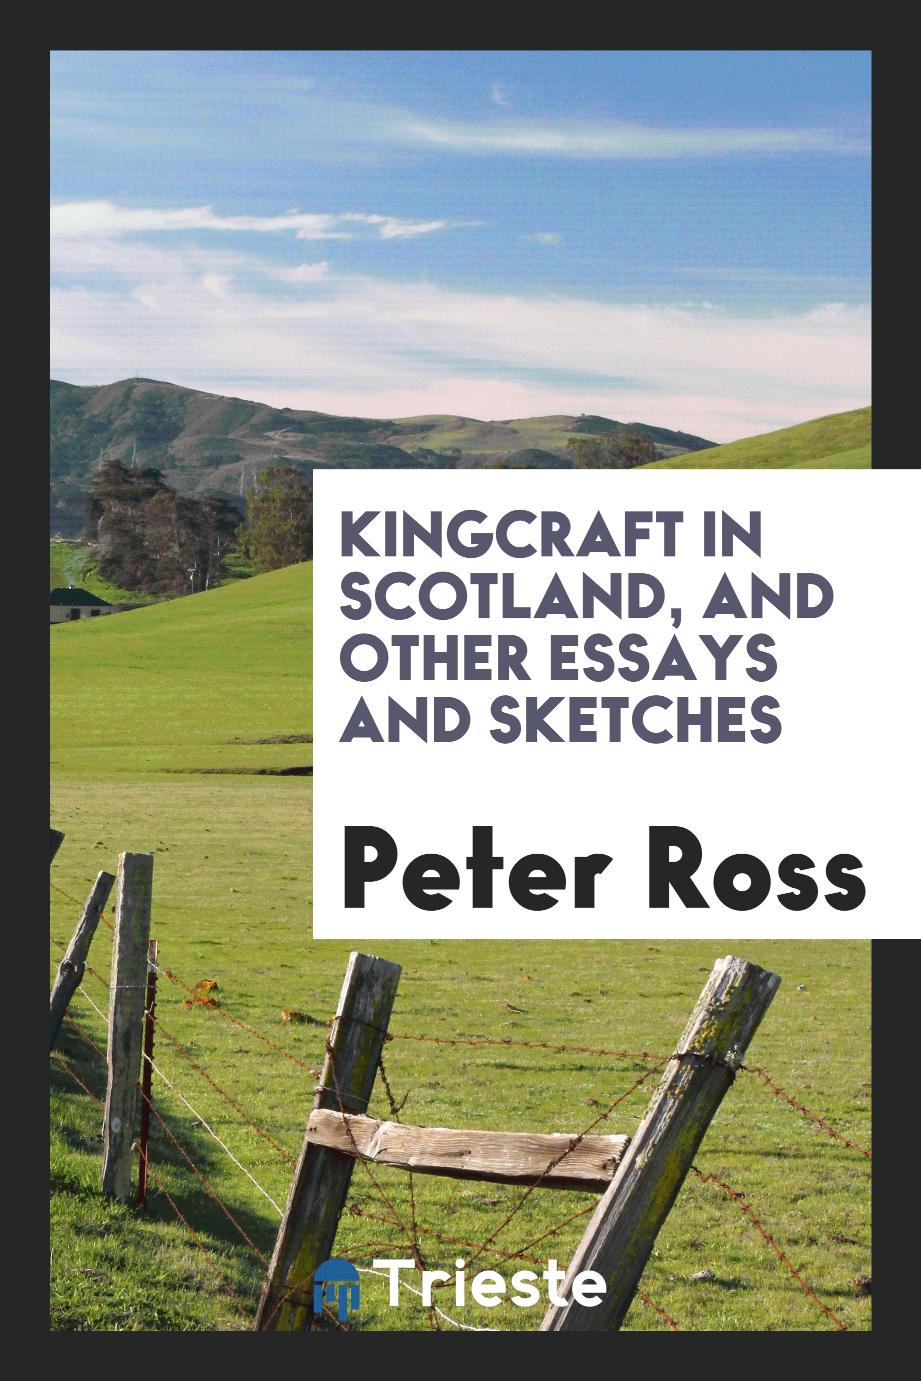 Kingcraft in Scotland, and other essays and sketches